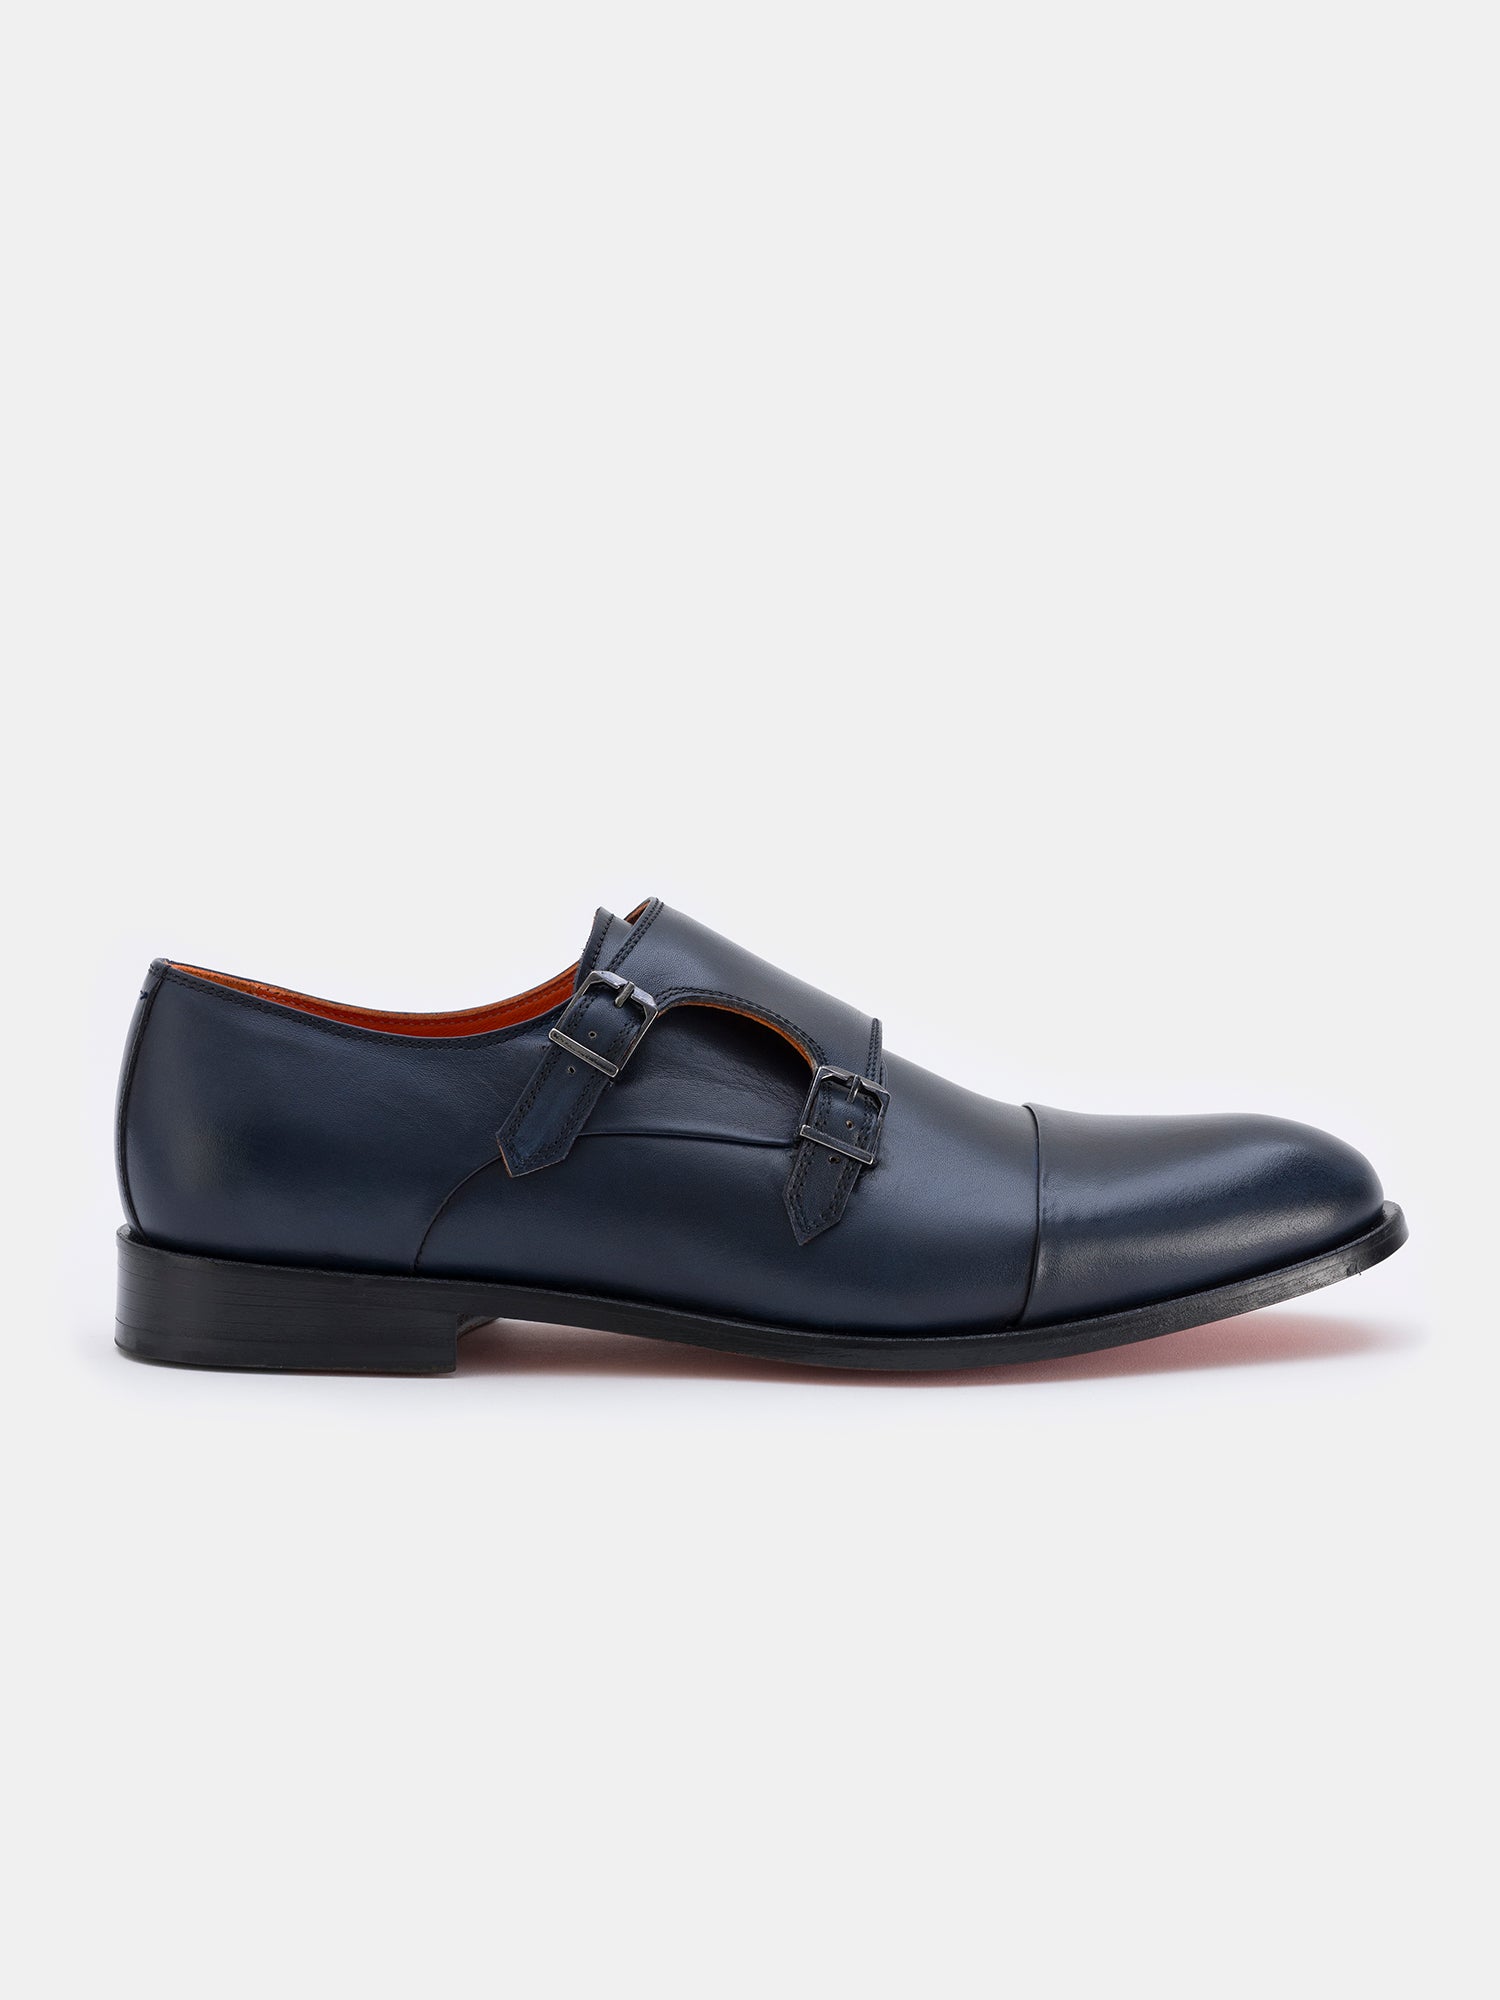 Navy Leather Monk Straps Shoes